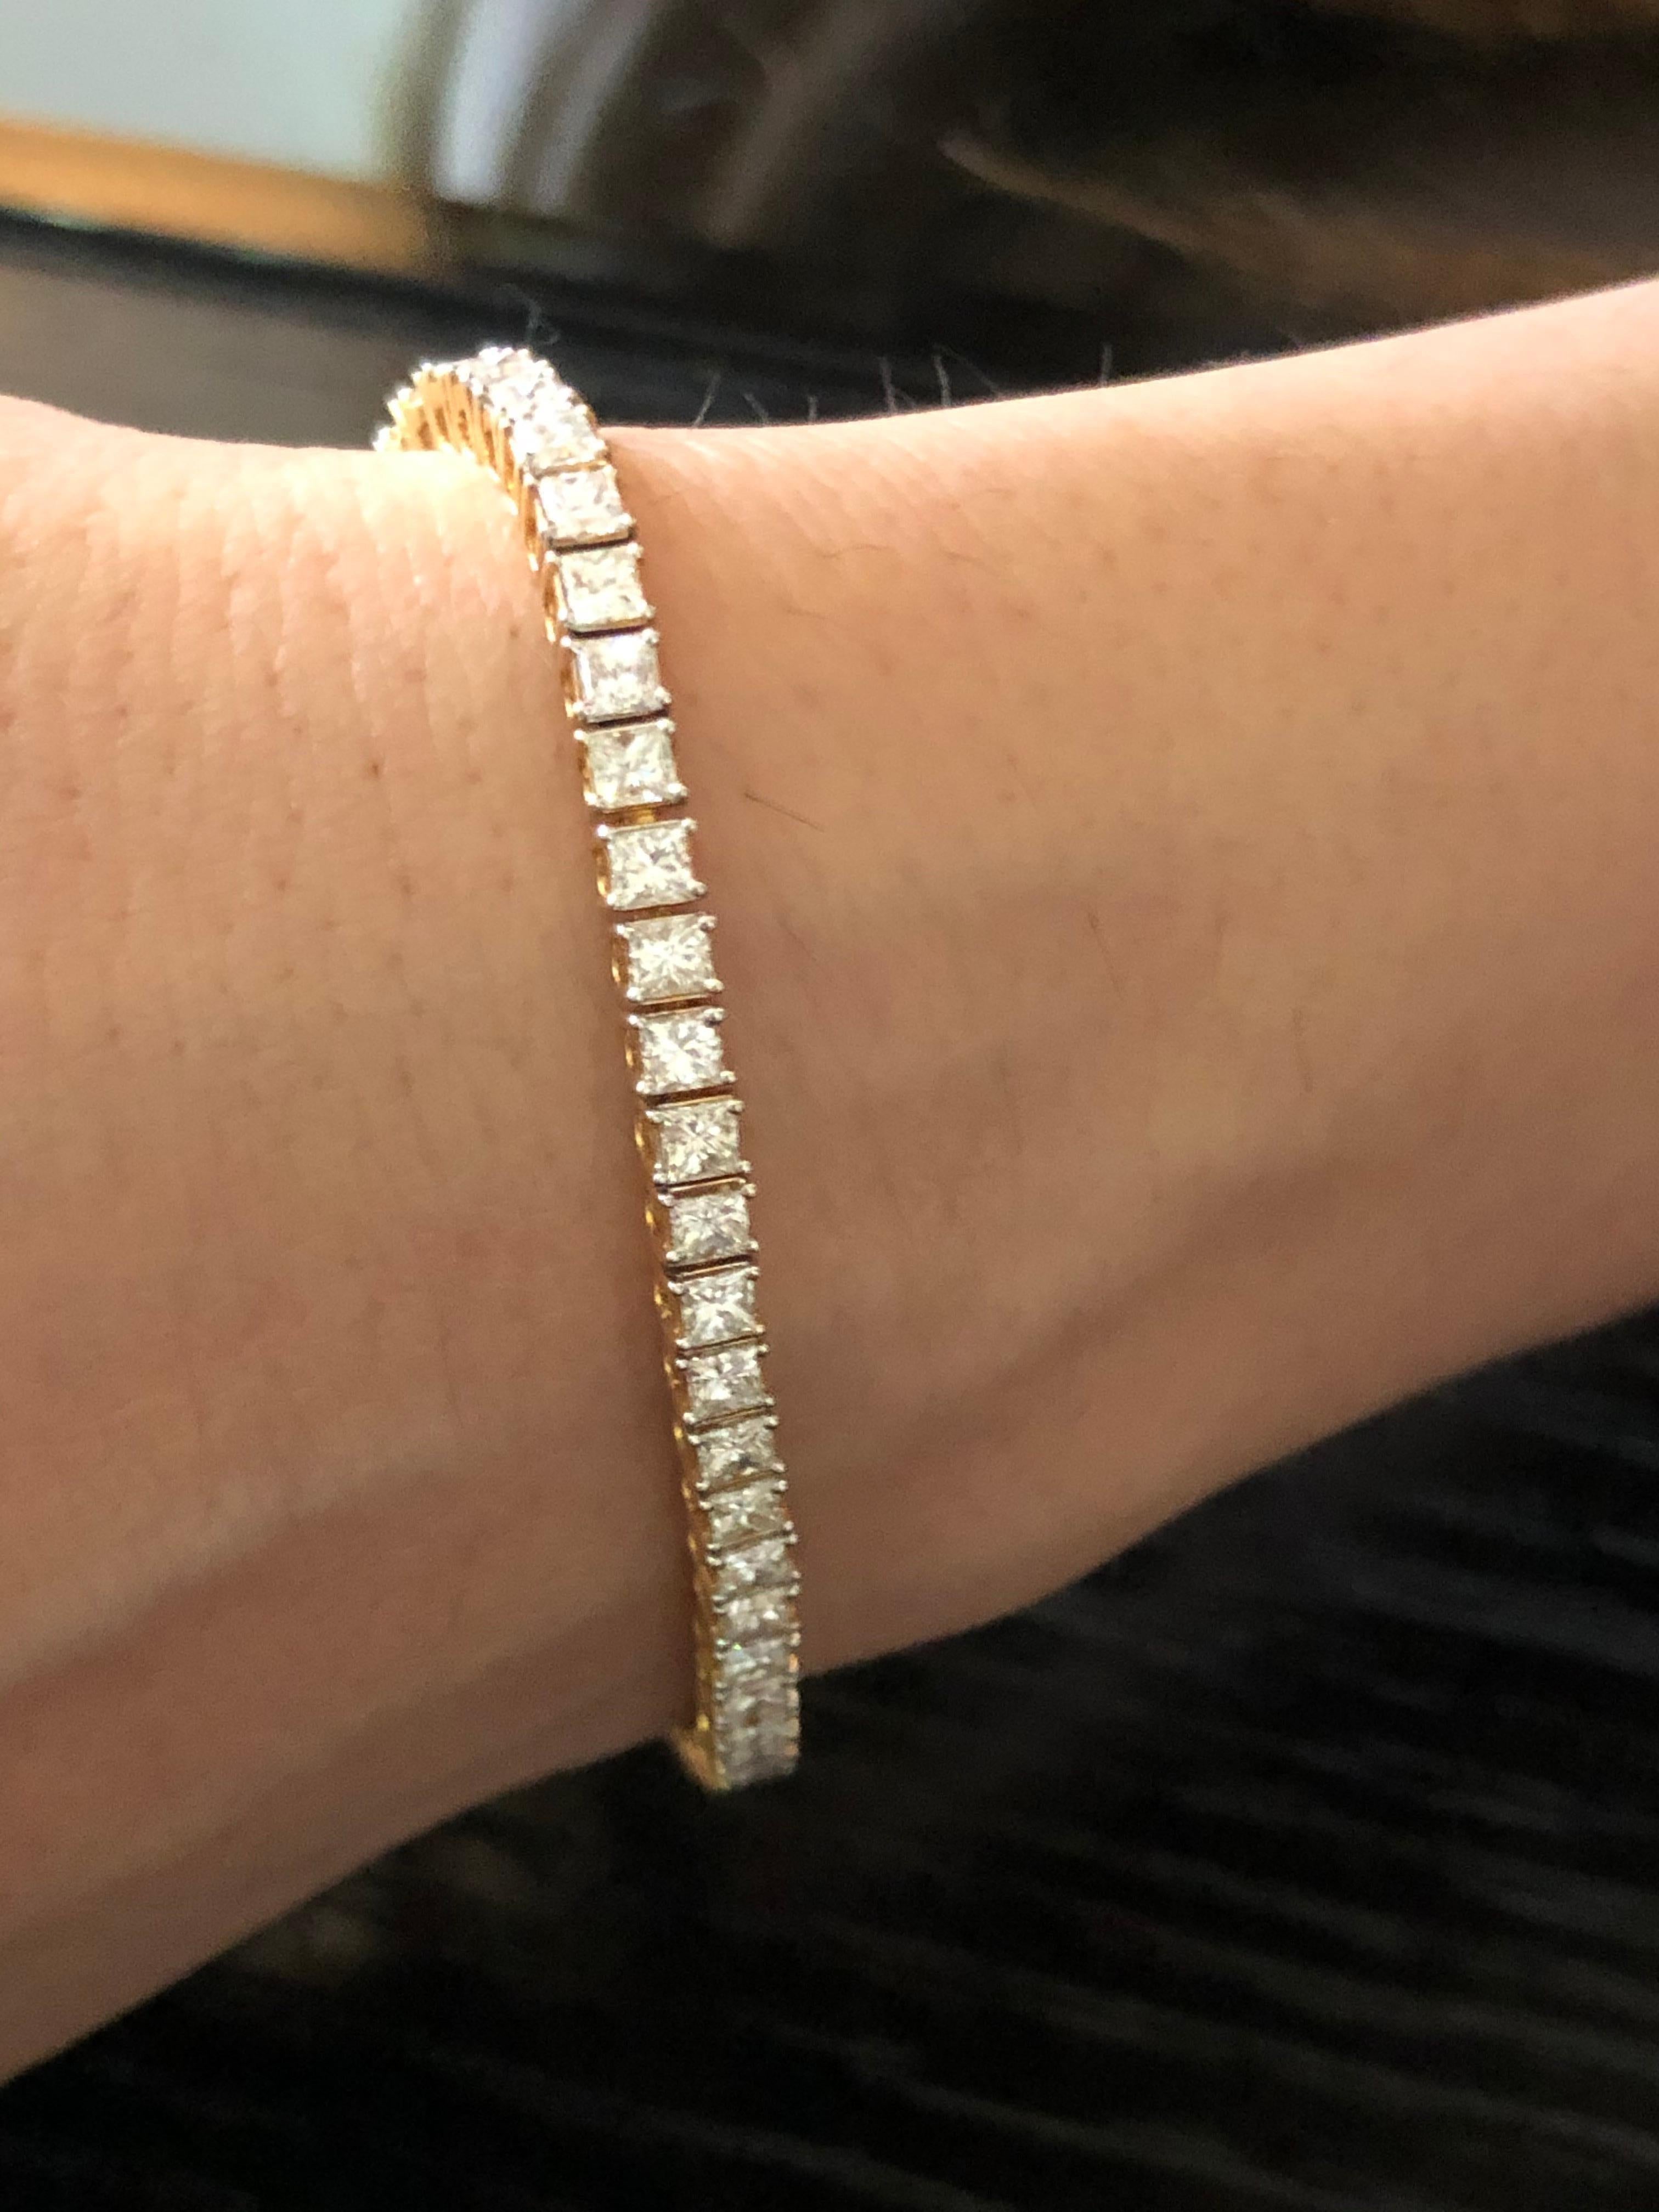 Diamond: 4.84 carats
Gold: 9.862 grams 18k
.075 cents average size 
Colour HI
Clarity VS
Note: This bracelet can be altered according to your wrist size 

A classic bracelet for everyday use that completes your whole look